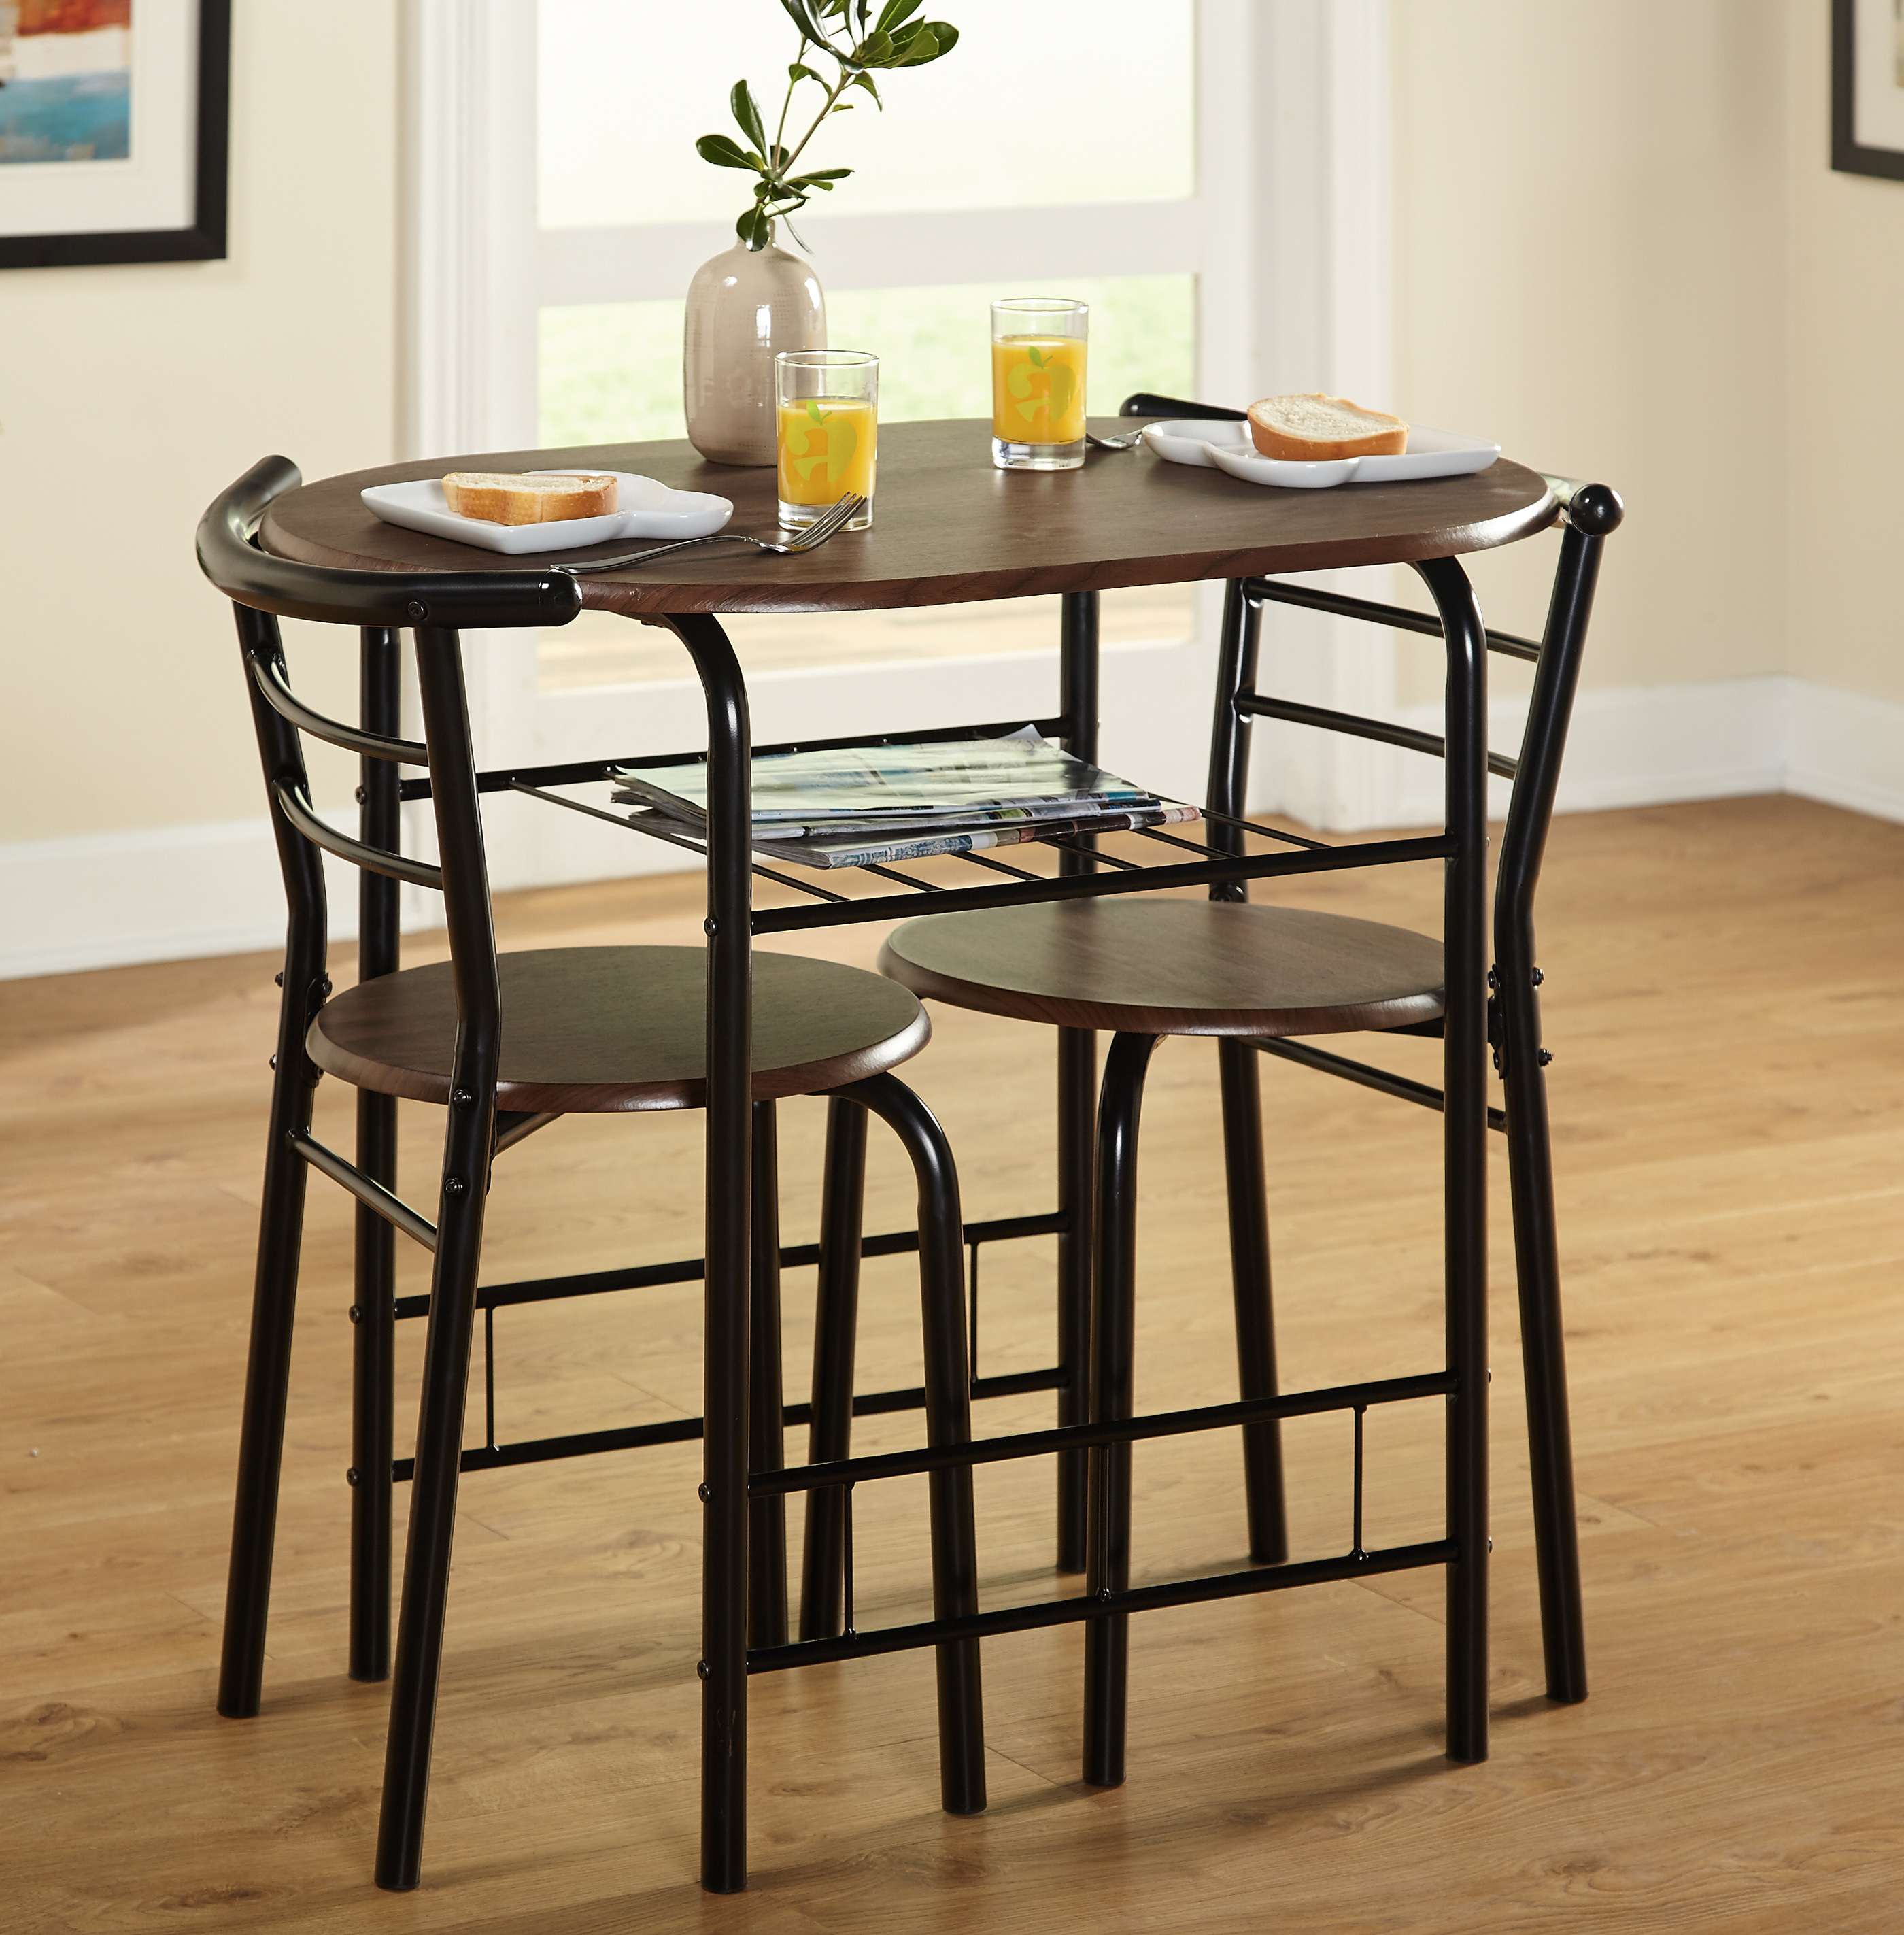 Target Marketing Systems 3 - Piece Bistro Dining Set - image 5 of 5